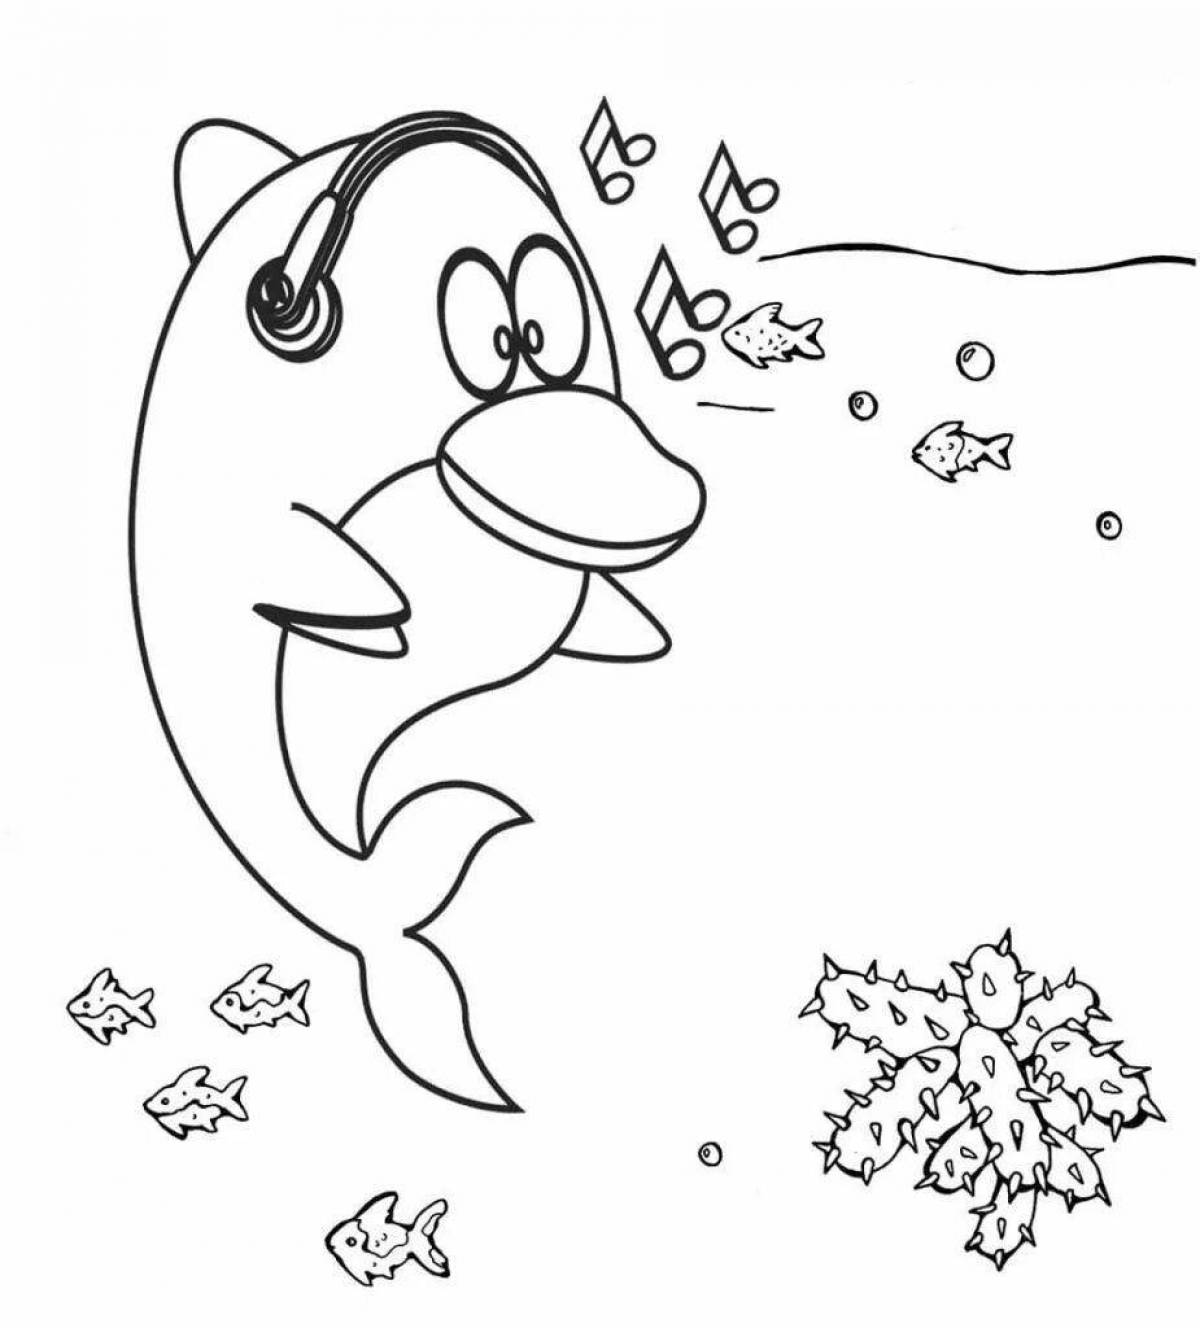 Fabulous dolphin coloring book for kids